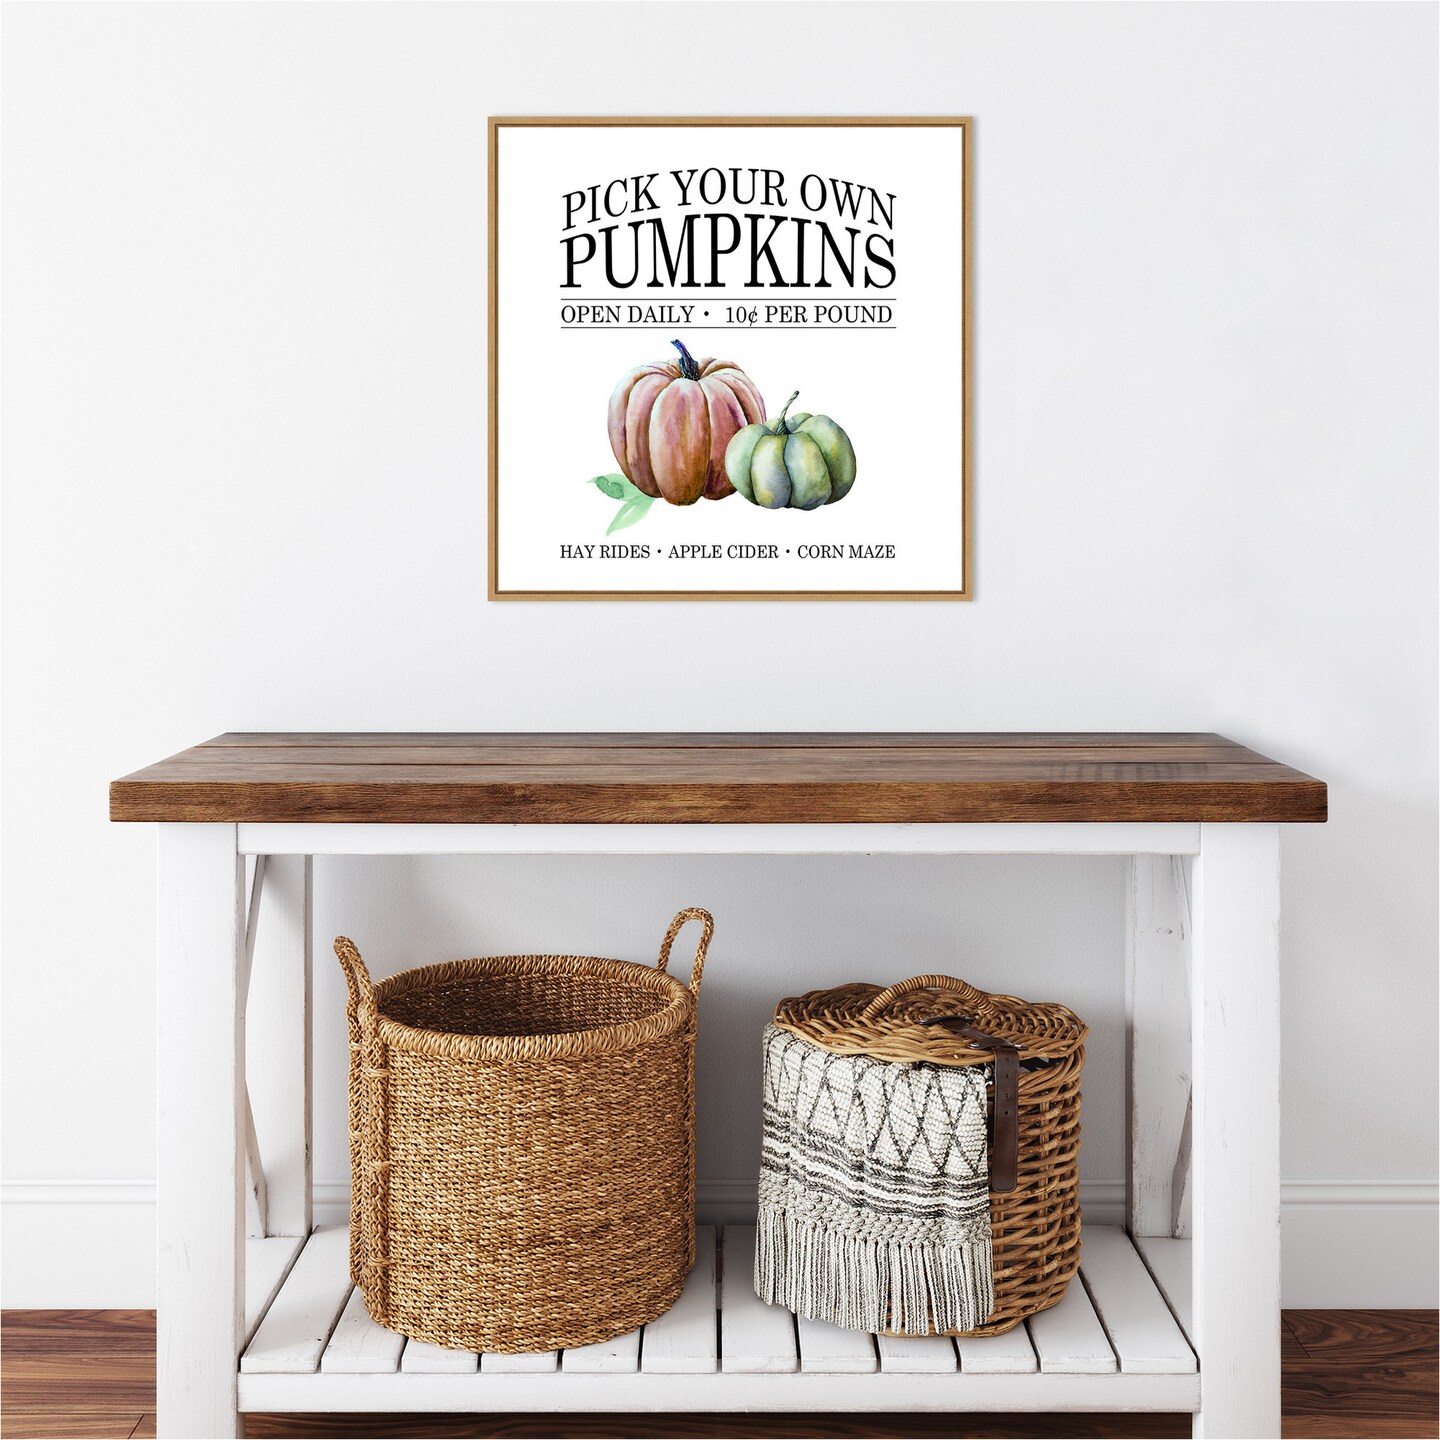 Pick Your Own Pumpkins by Amanti Art Portfolio 22-in. W x 22-in. H. Canvas Wall Art Print Framed in Natural